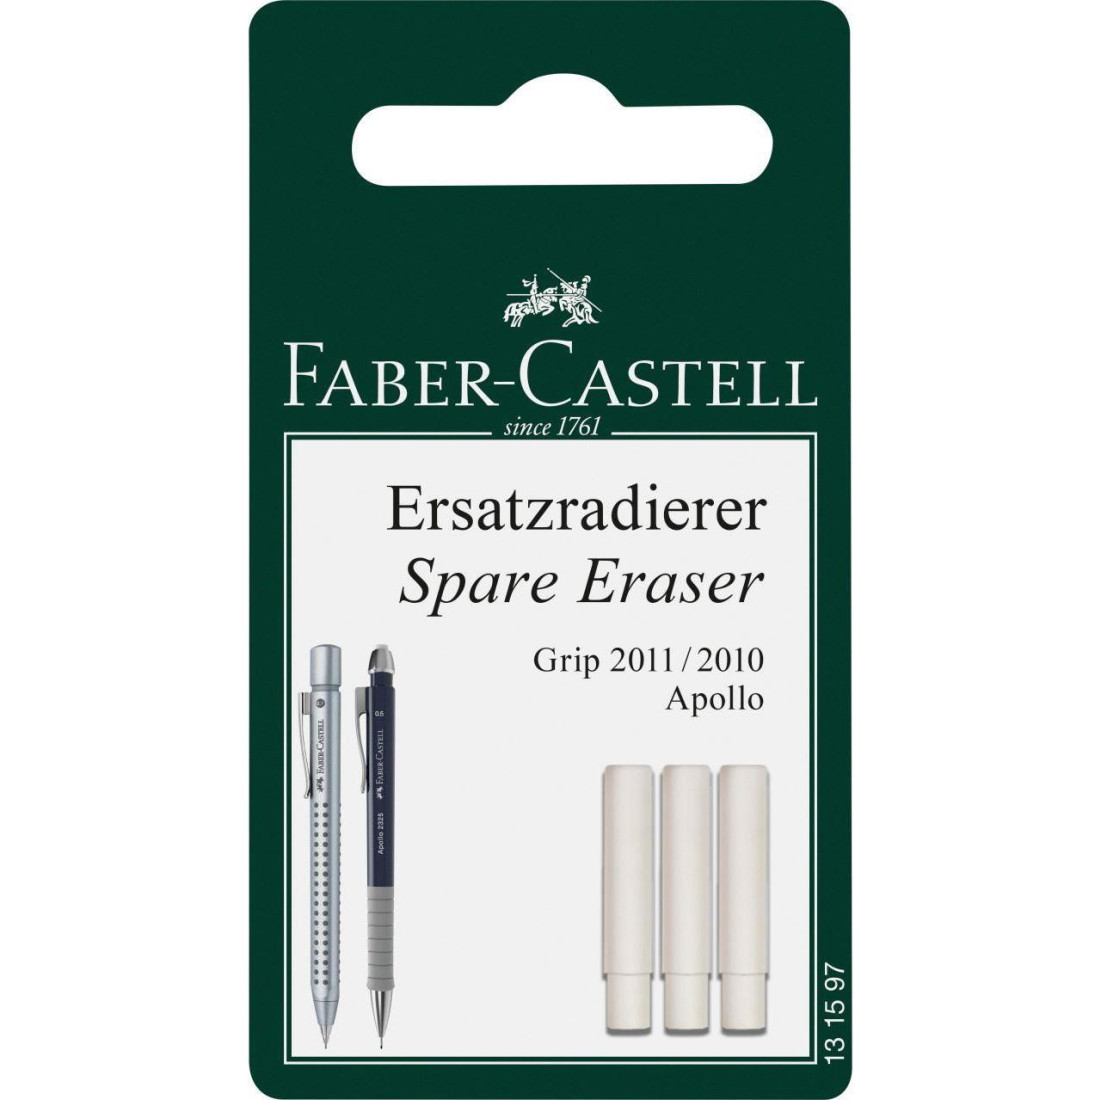 Faber Castell Grip 2011 spare erasers set of 3 for mechanical pencil 131597